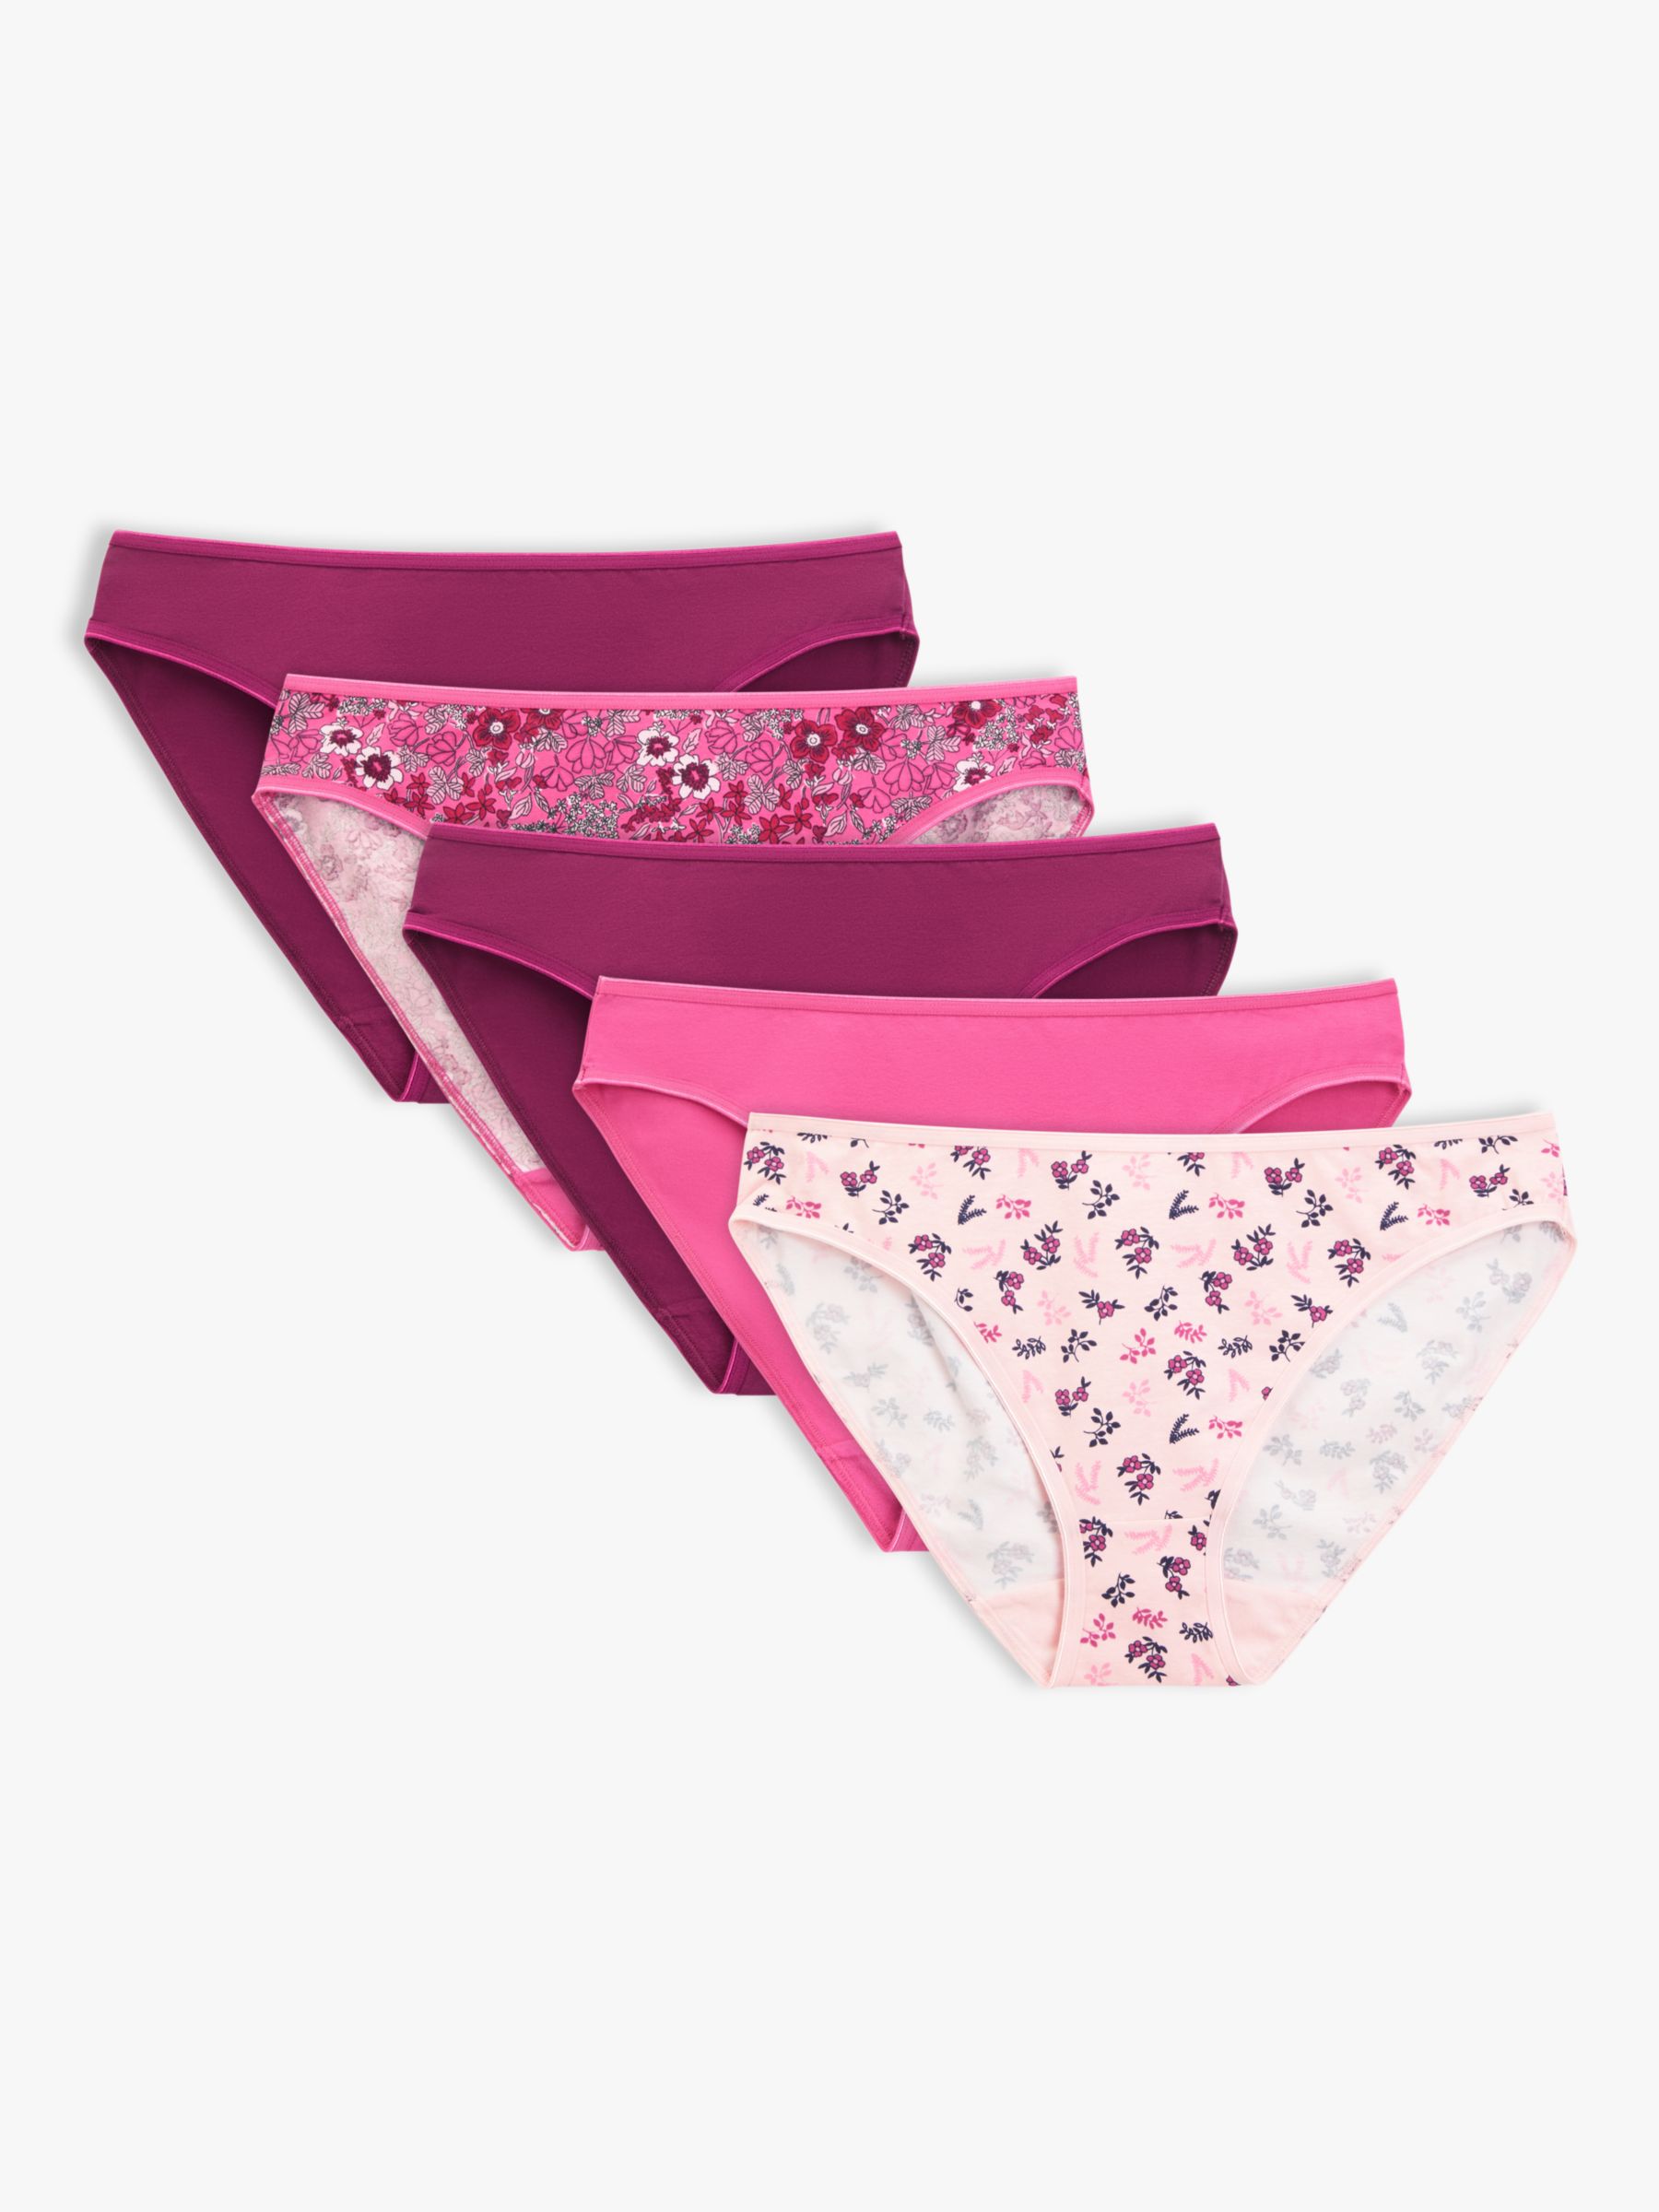 John Lewis ANYDAY Florals Cotton Bikini Knickers, Pack of 5, Pinks at ...